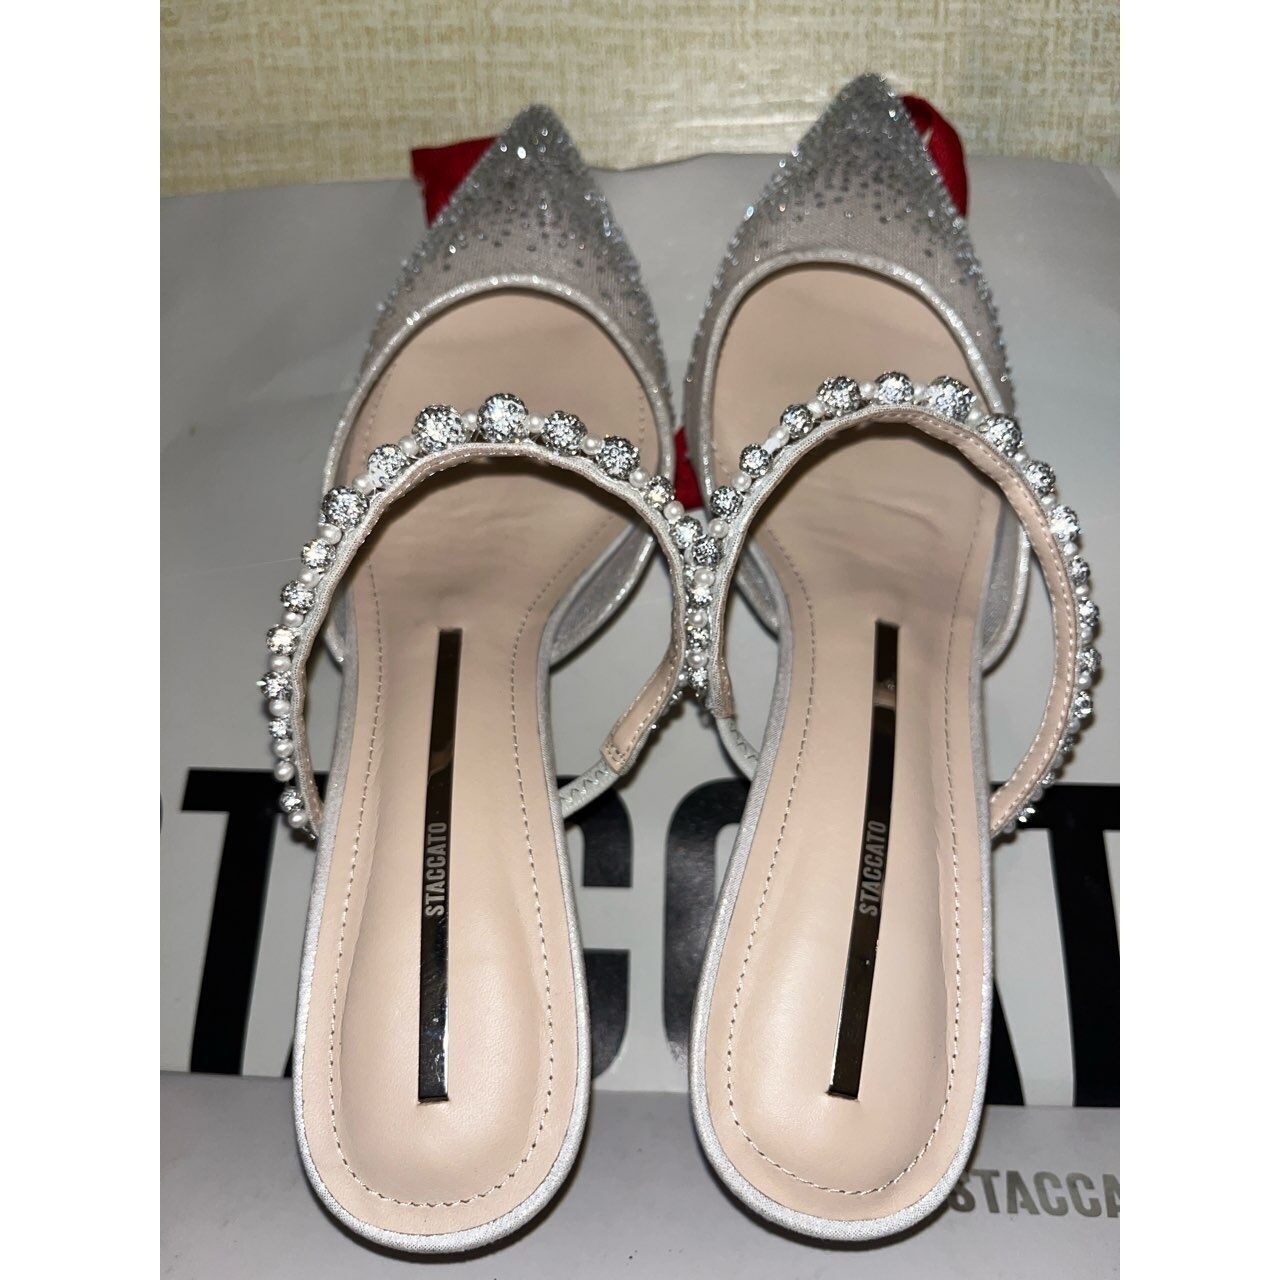 Staccato Silver Heels